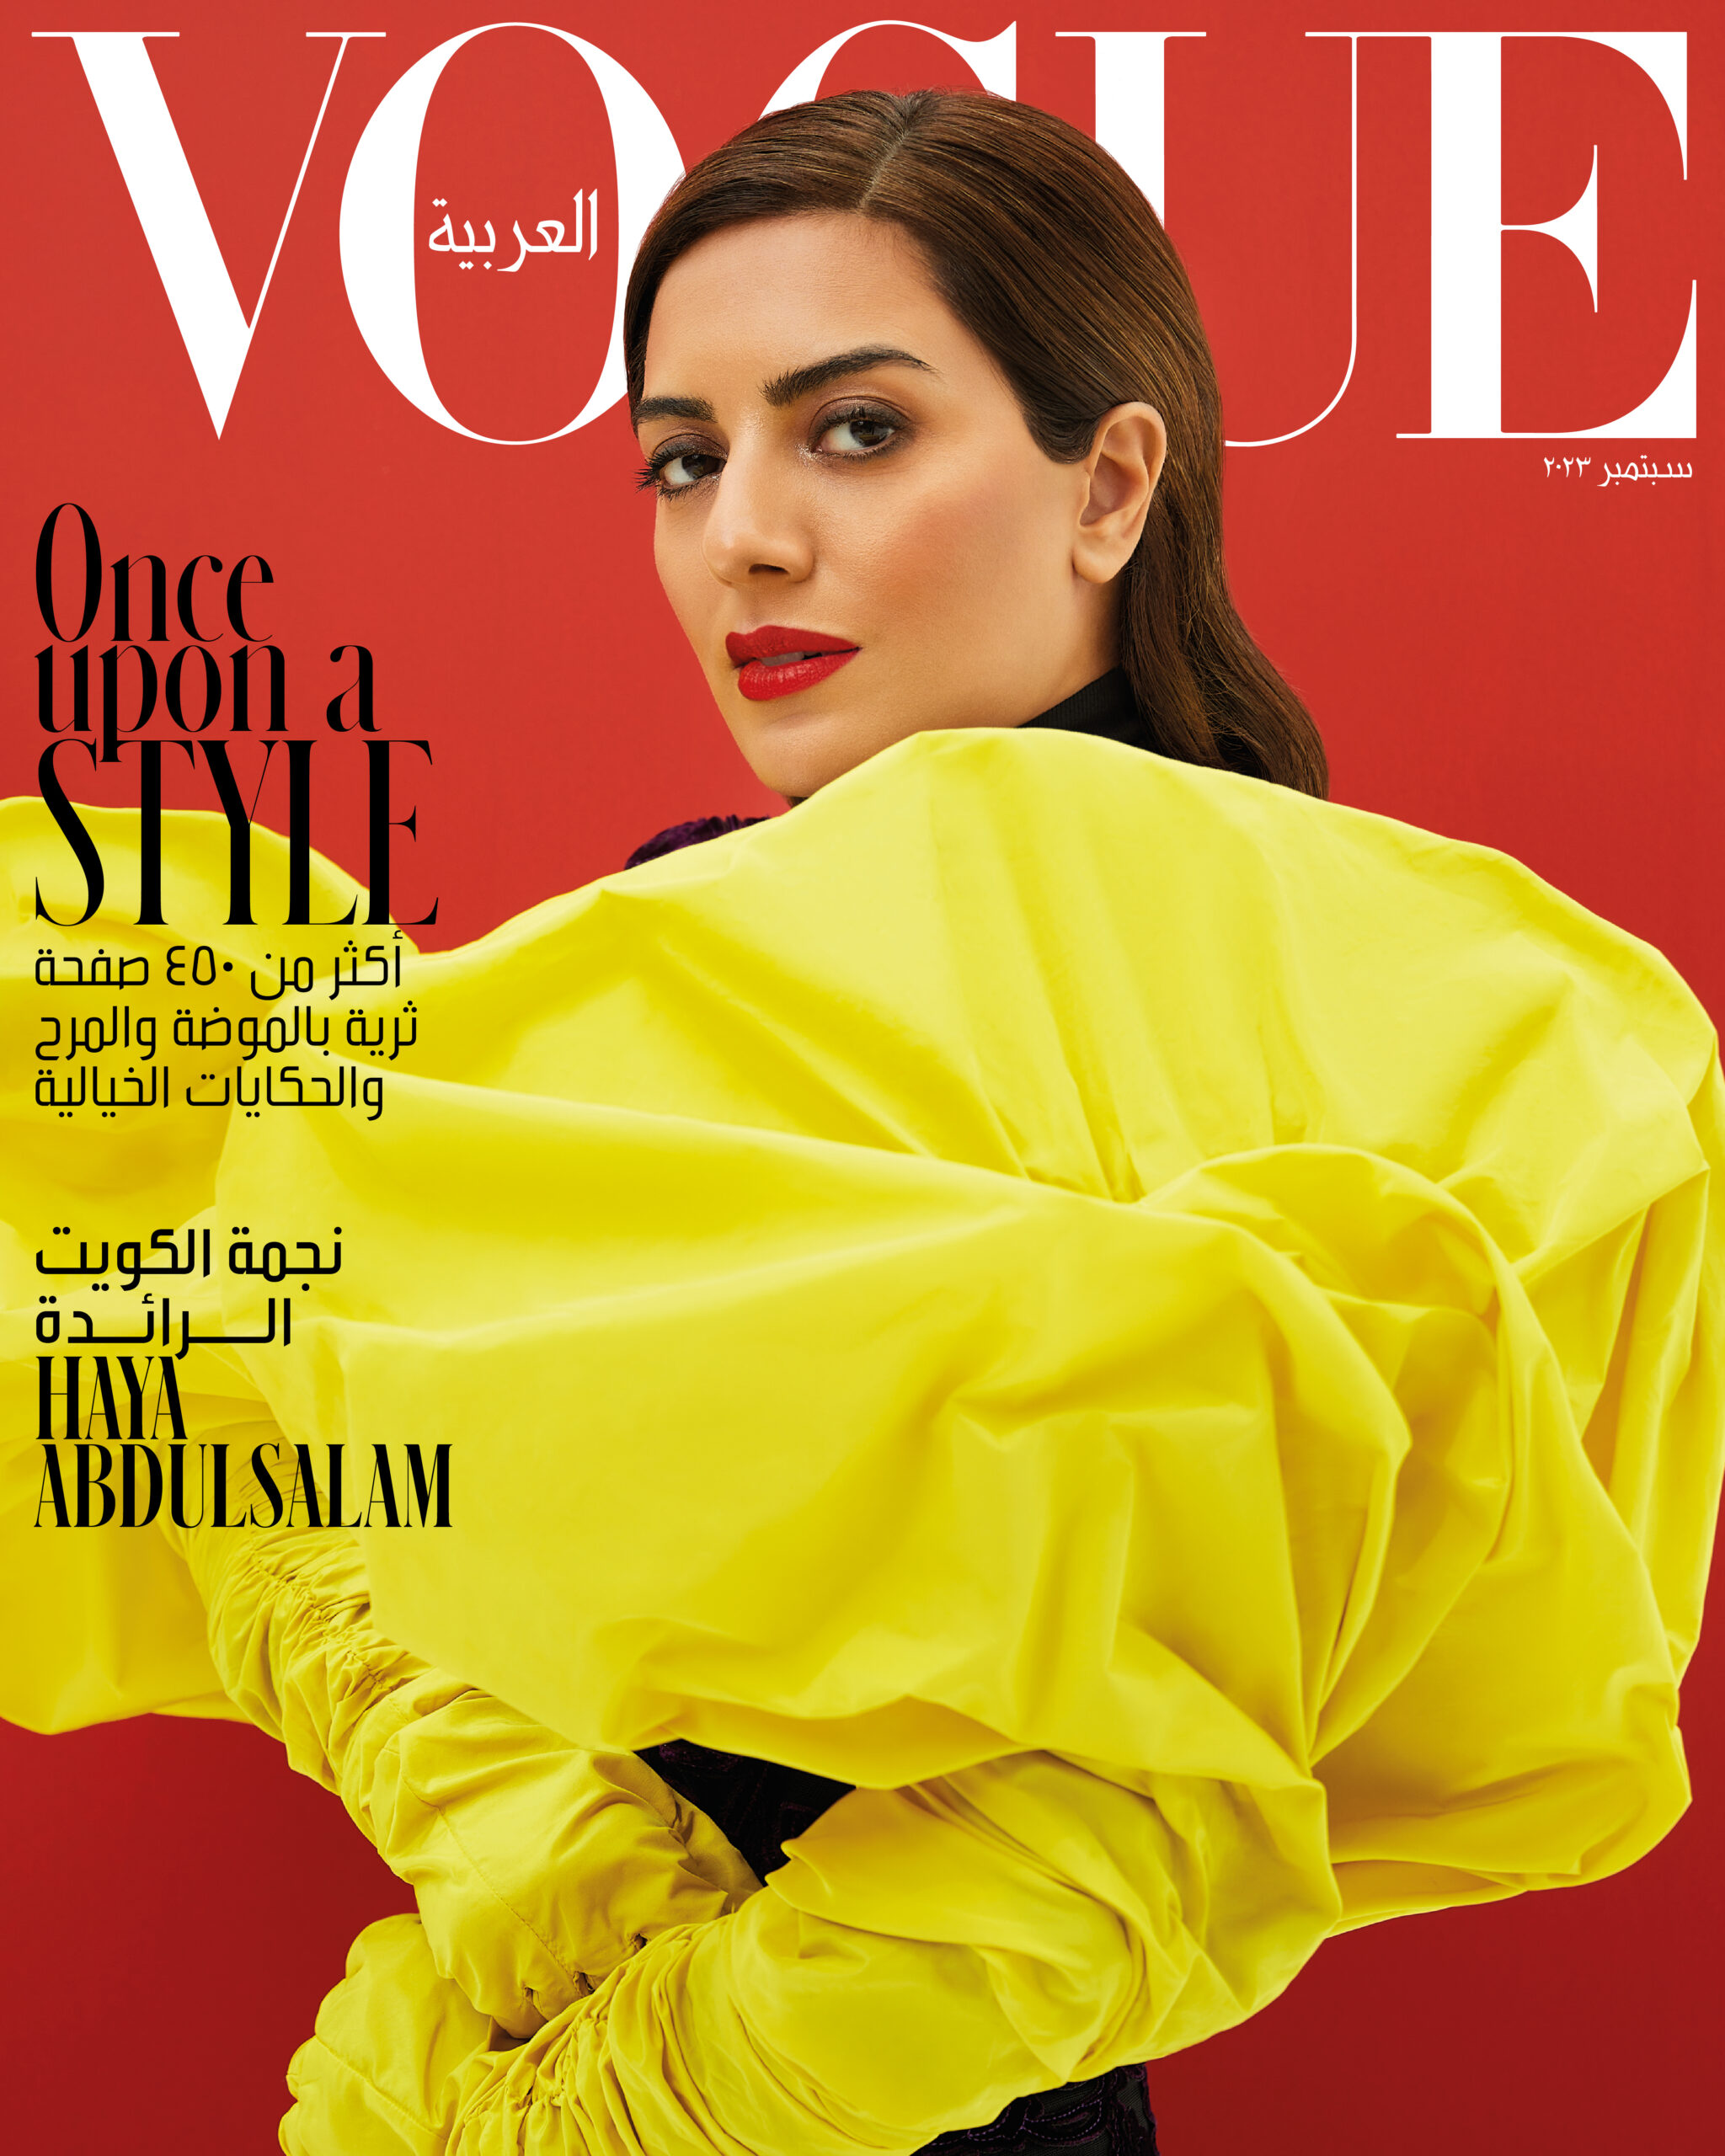 See all 27 editions of Vogue's The Creativity Issue covers